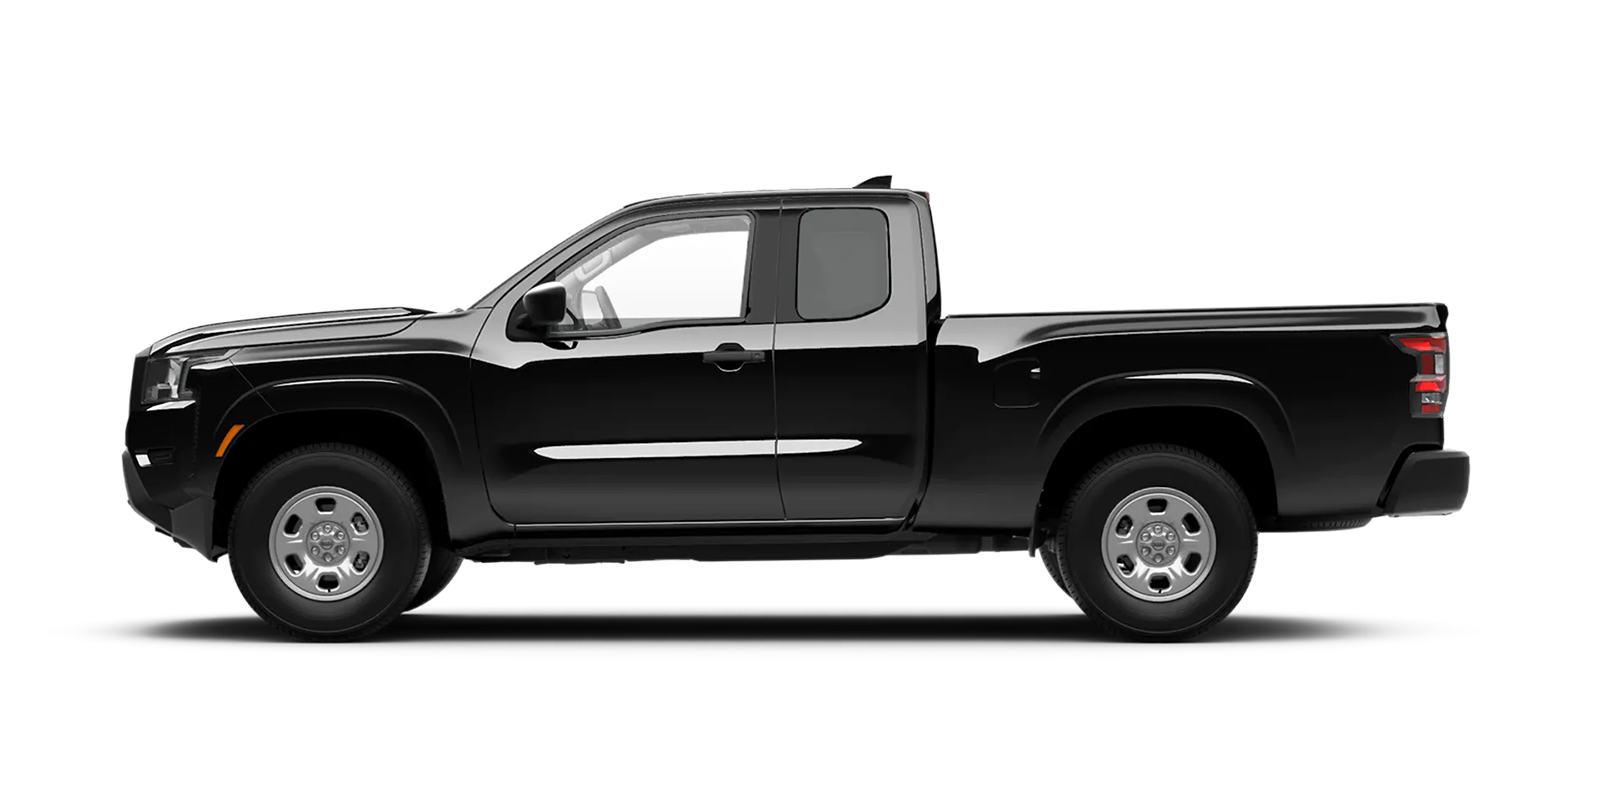 2022 Frontier King Cab S 4x4 in Super Black | Nissan of Pittsfield in Pittsfield MA